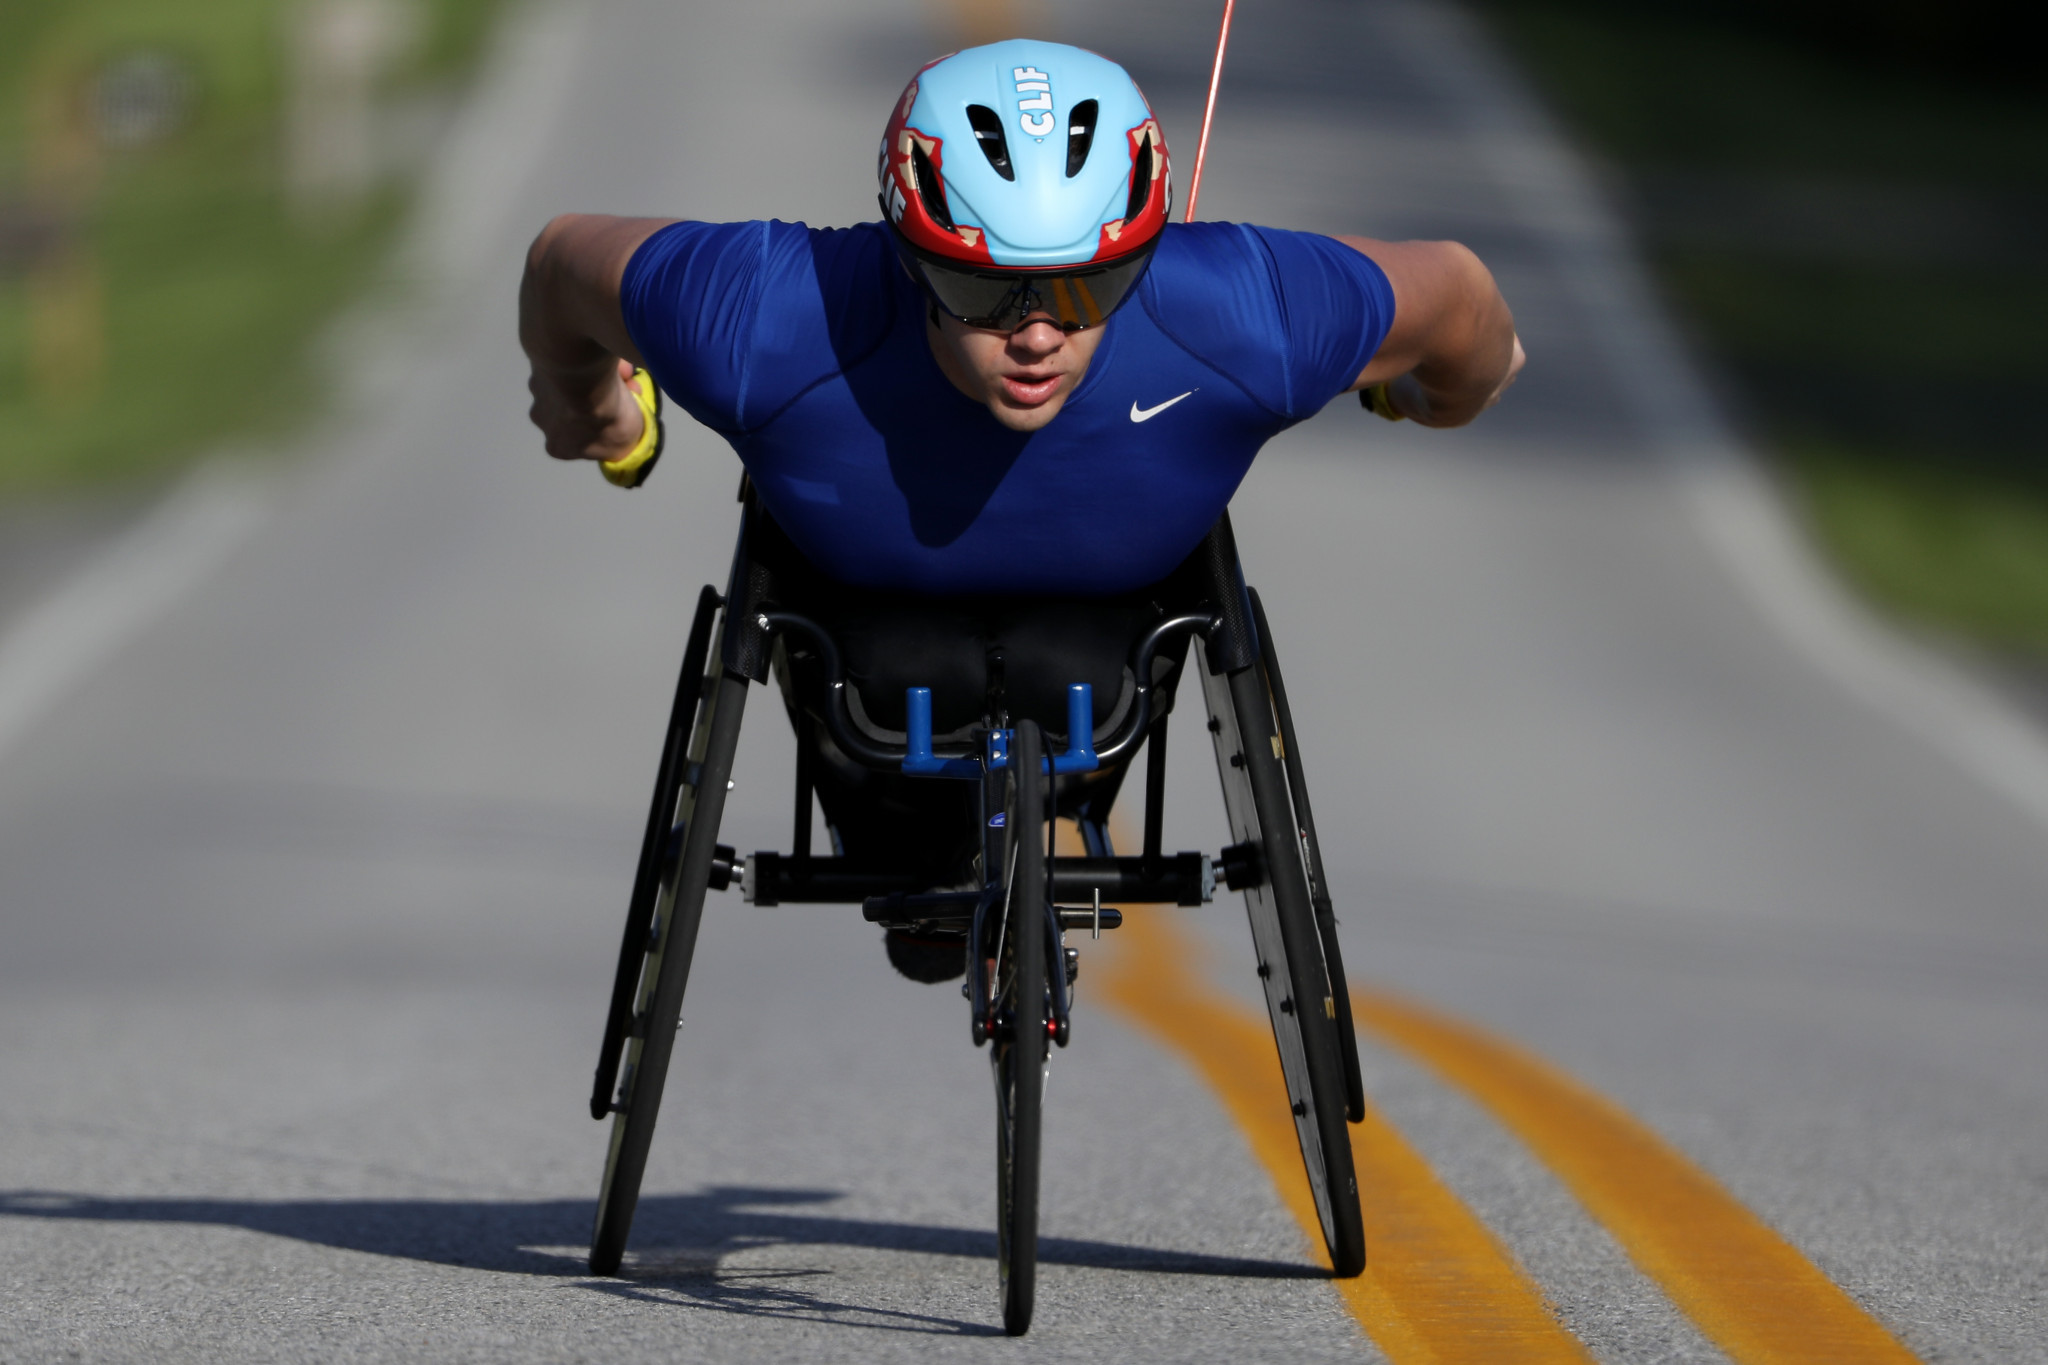 American Daniel Romanchuk will aim to continue his domination in men's wheelchair racing at the London Marathon ©Getty Images